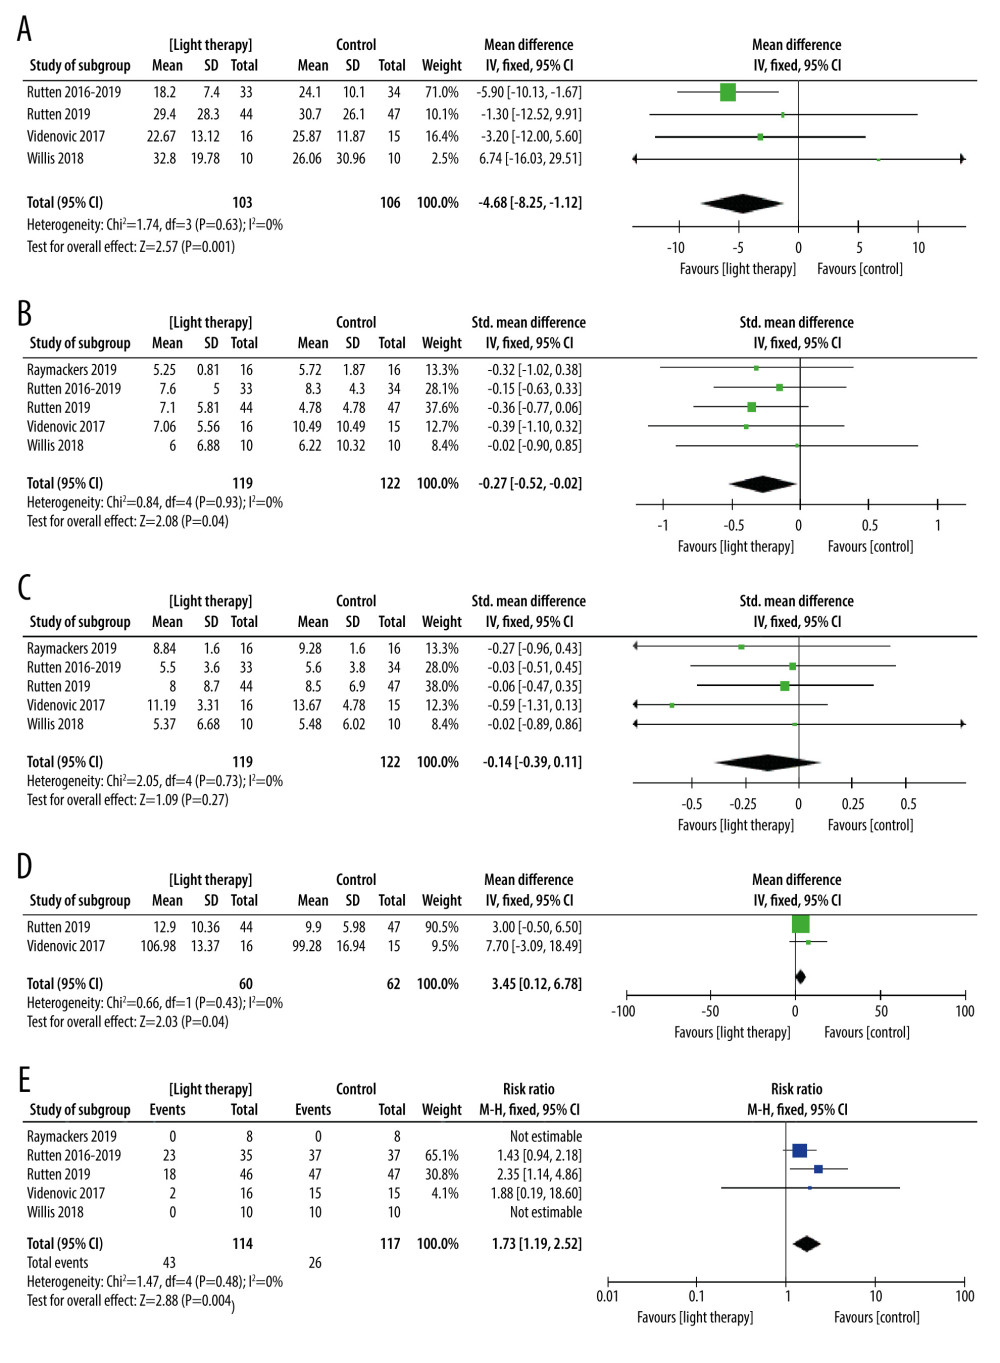 The forest plot of the meta-analysis of randomized clinical trials compared motor function (A), depression status (B), excessive daytime sleepiness (C), sleep disorders (D), and adverse events (E) in patients with Parkinson disease treated with light therapy and placebo. Review Manager 5.4 was used to create the figures.